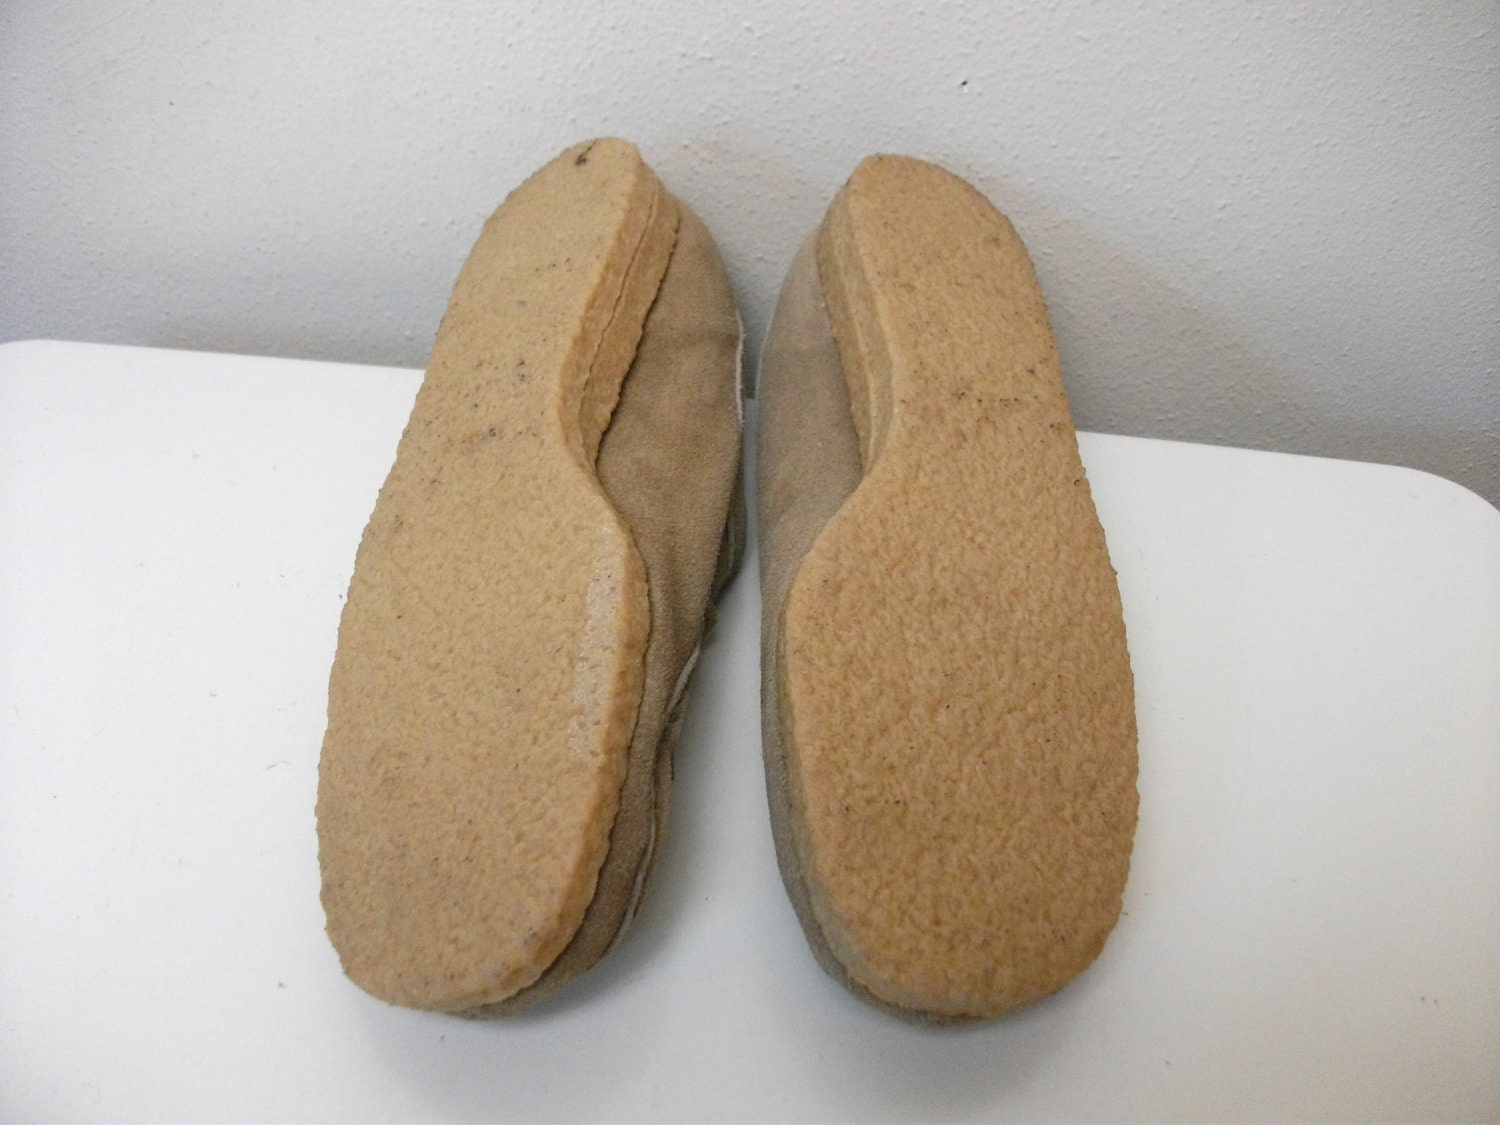 1970s Tan Suede Earth Shoes Size 7.5